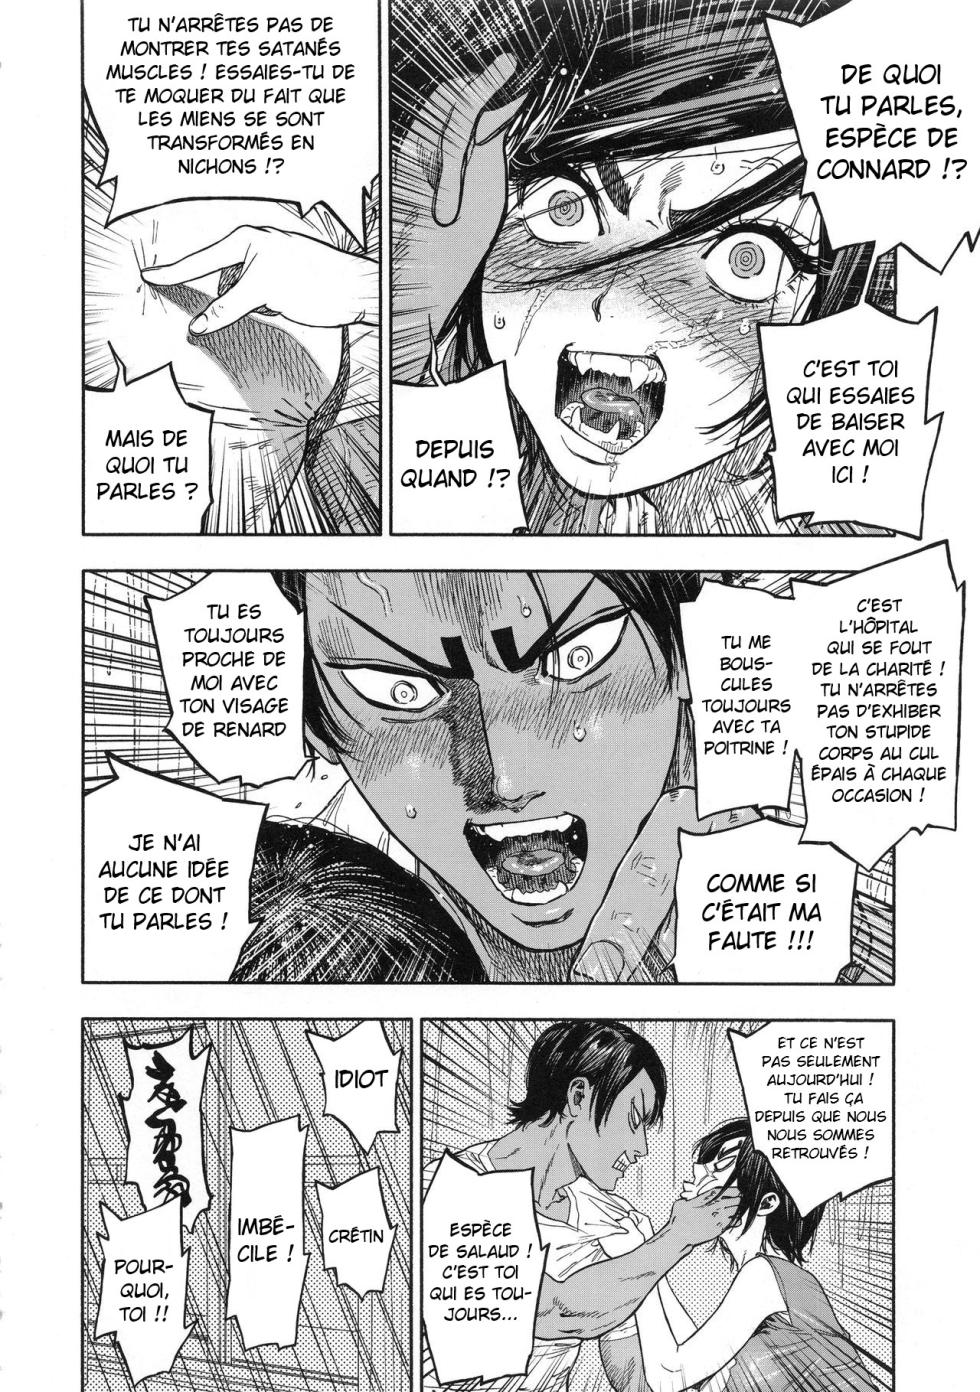 (SPARK14) [JAPAN (usa)] Koisugi (Golden Kamuy) [Histoire d'Hentai] [French] - Page 21